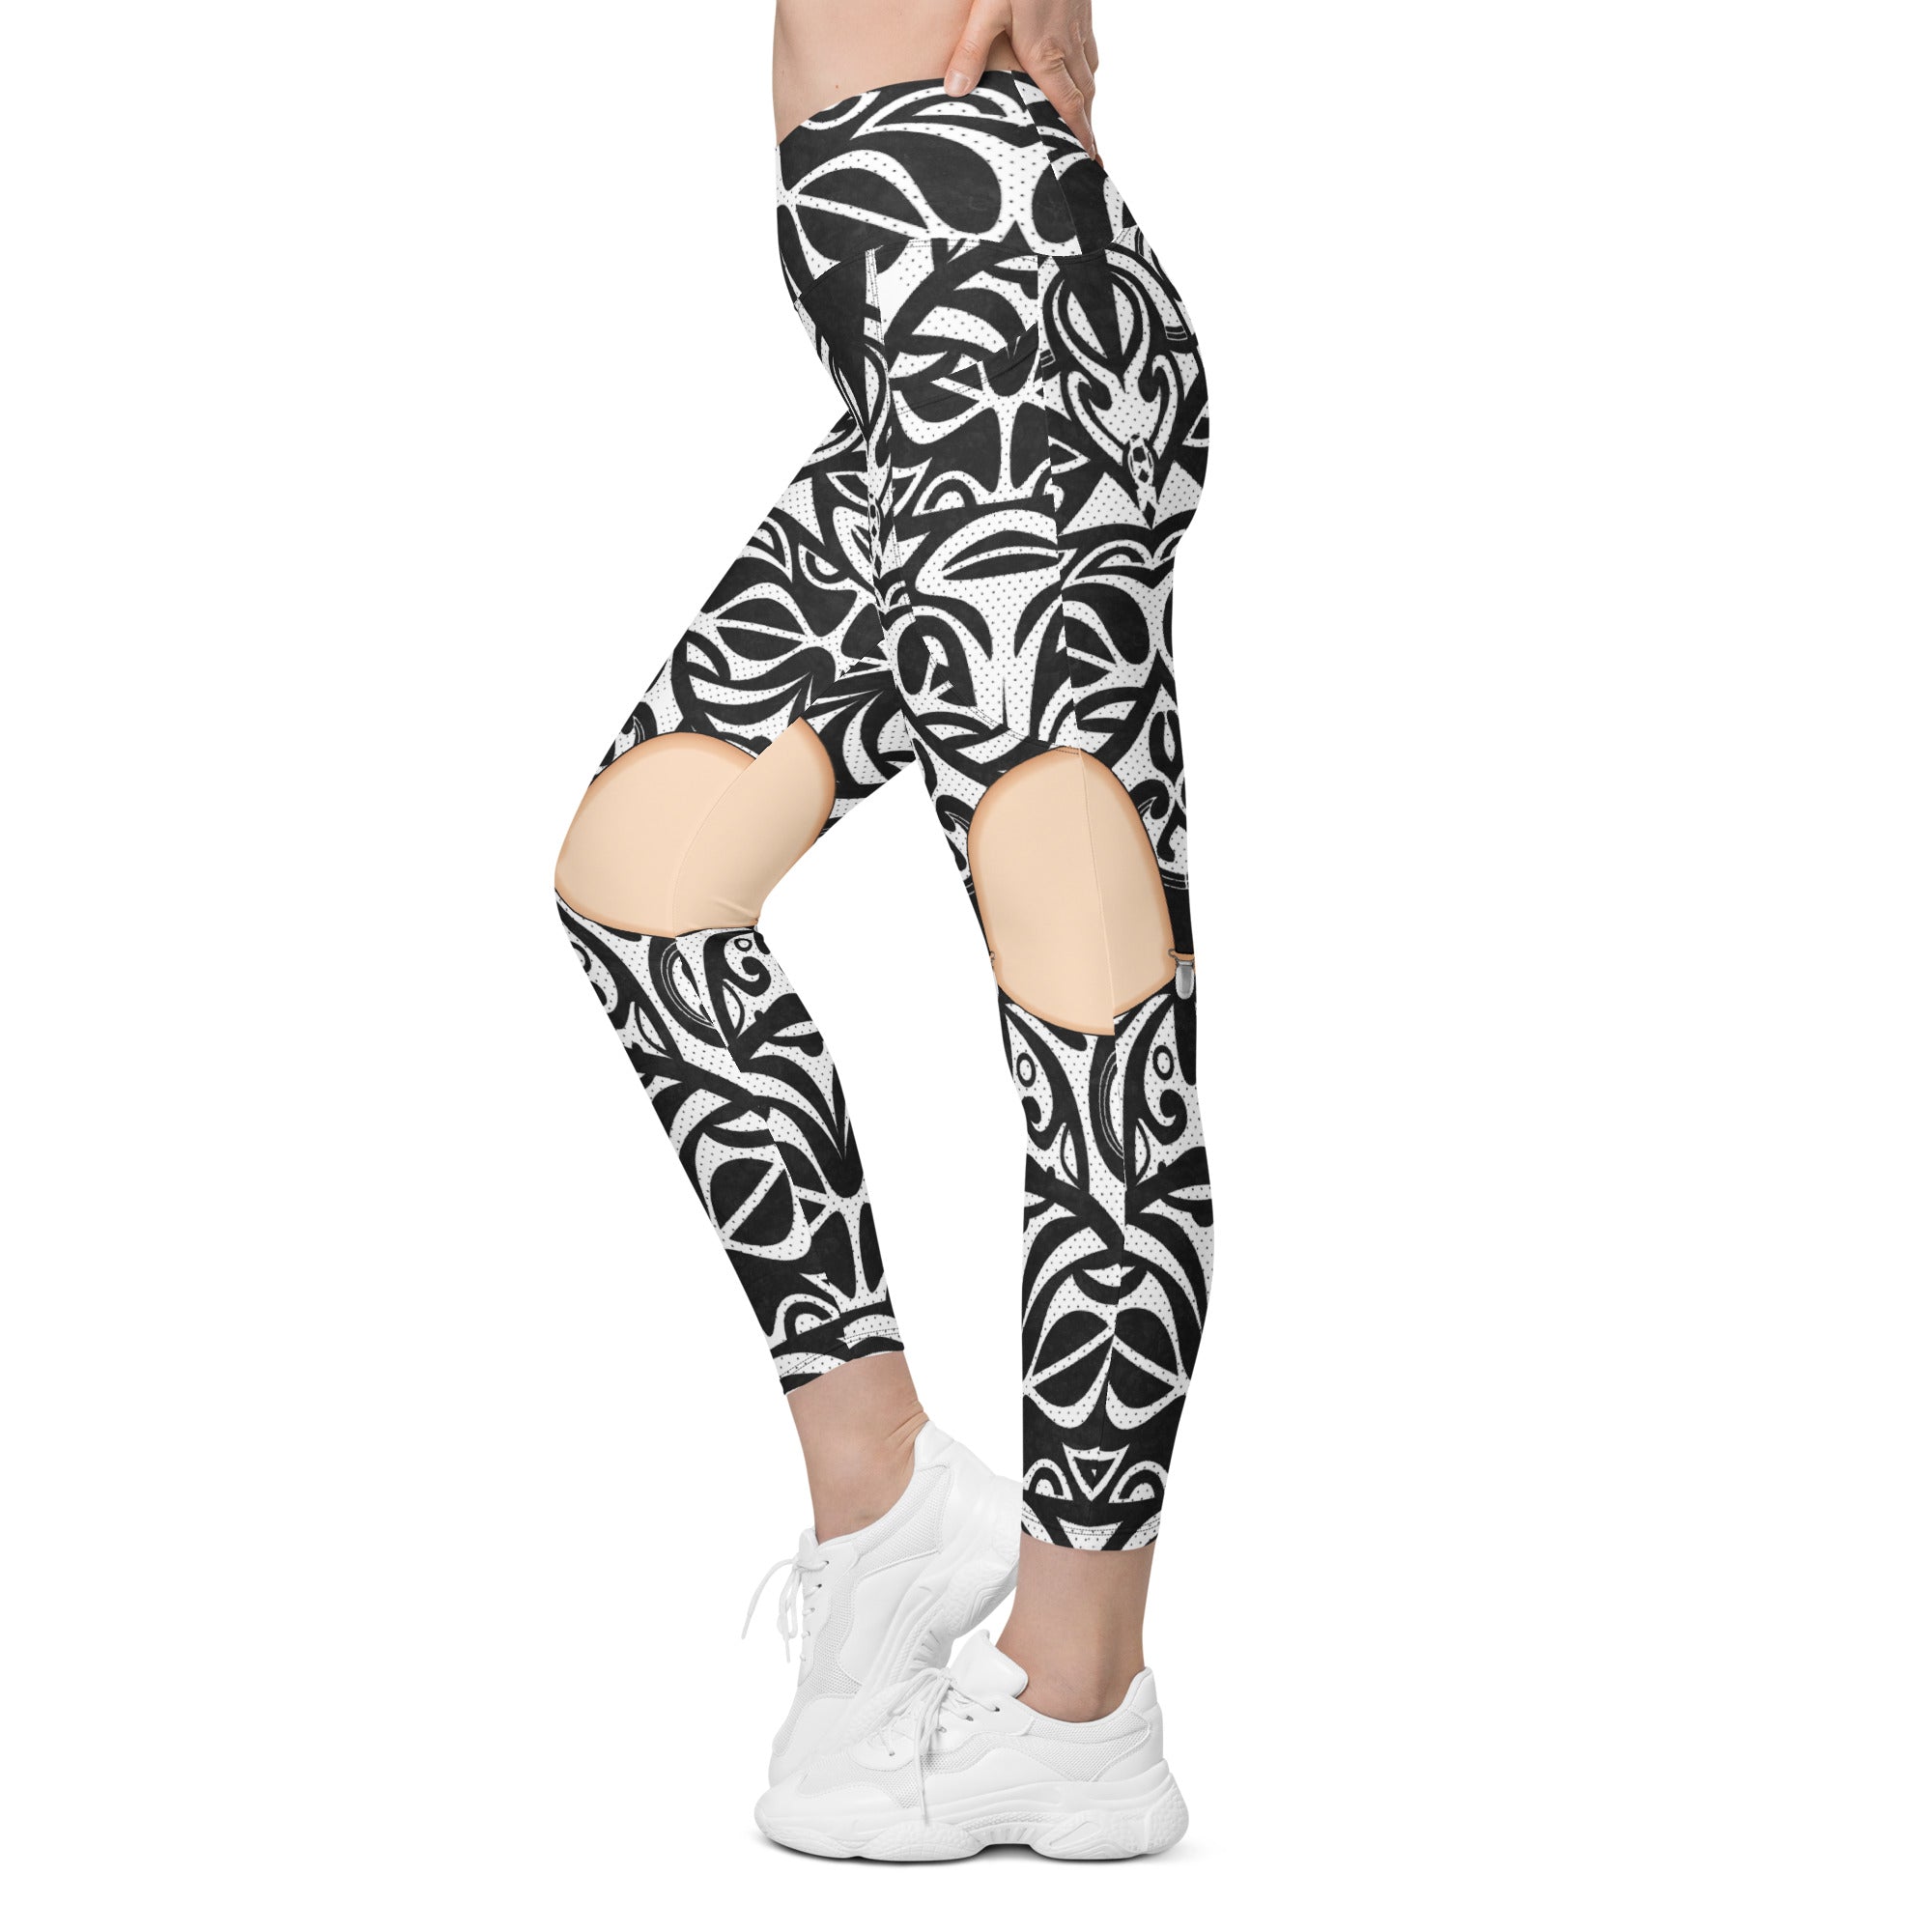 Girl Power 24/7™ Crossover Leggings with Pockets - Be Unstoppable in